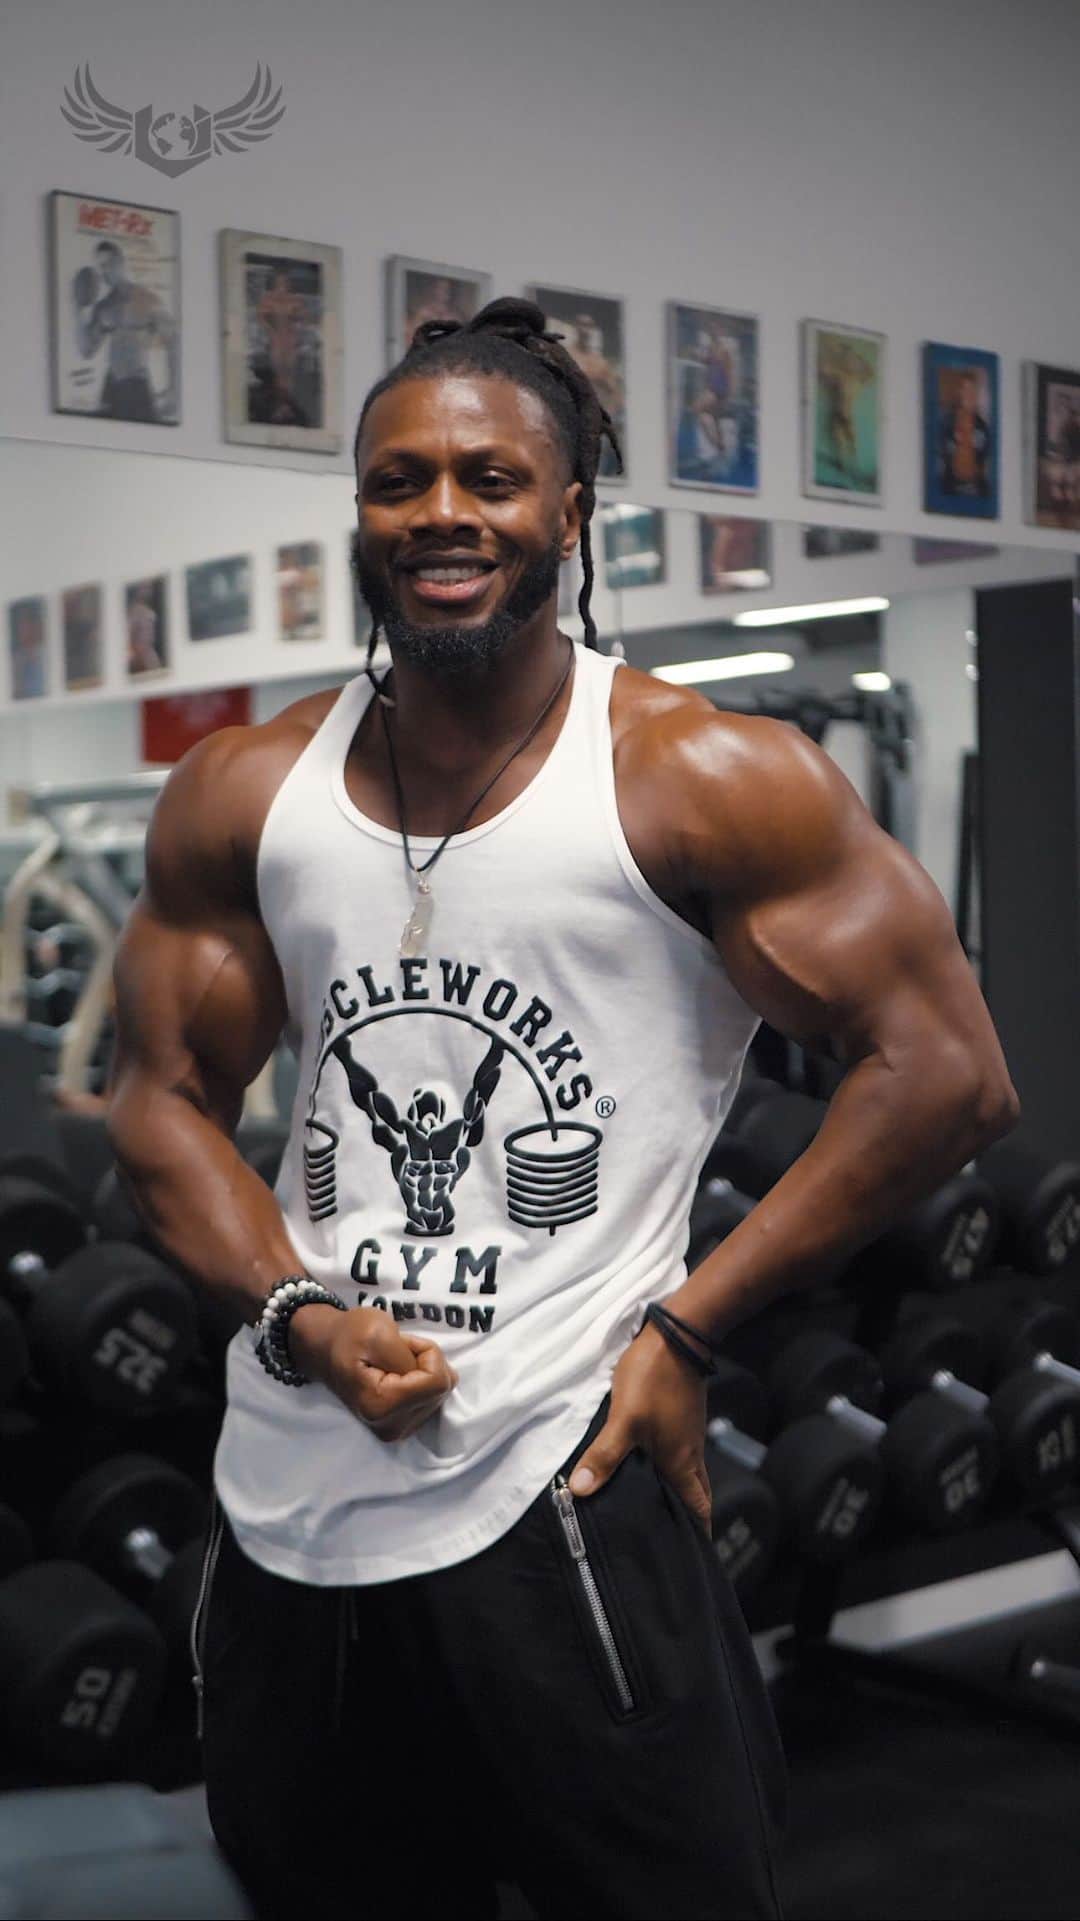 Ulissesworldのインスタグラム：「Back at the legendary iron temple 🏋🏾 London’s best Gym! 💪🏾🔥  Great to catch up with the legend @sav_muscleworks and the rest of the team – the energy here is unmatched!  Not to forget the incredible kitchen here @muscleworksgym, hands down the best food to fuel those gains 🍲  If you’re in London, join me at Muscleworks today and let’s get a set in 🔥」